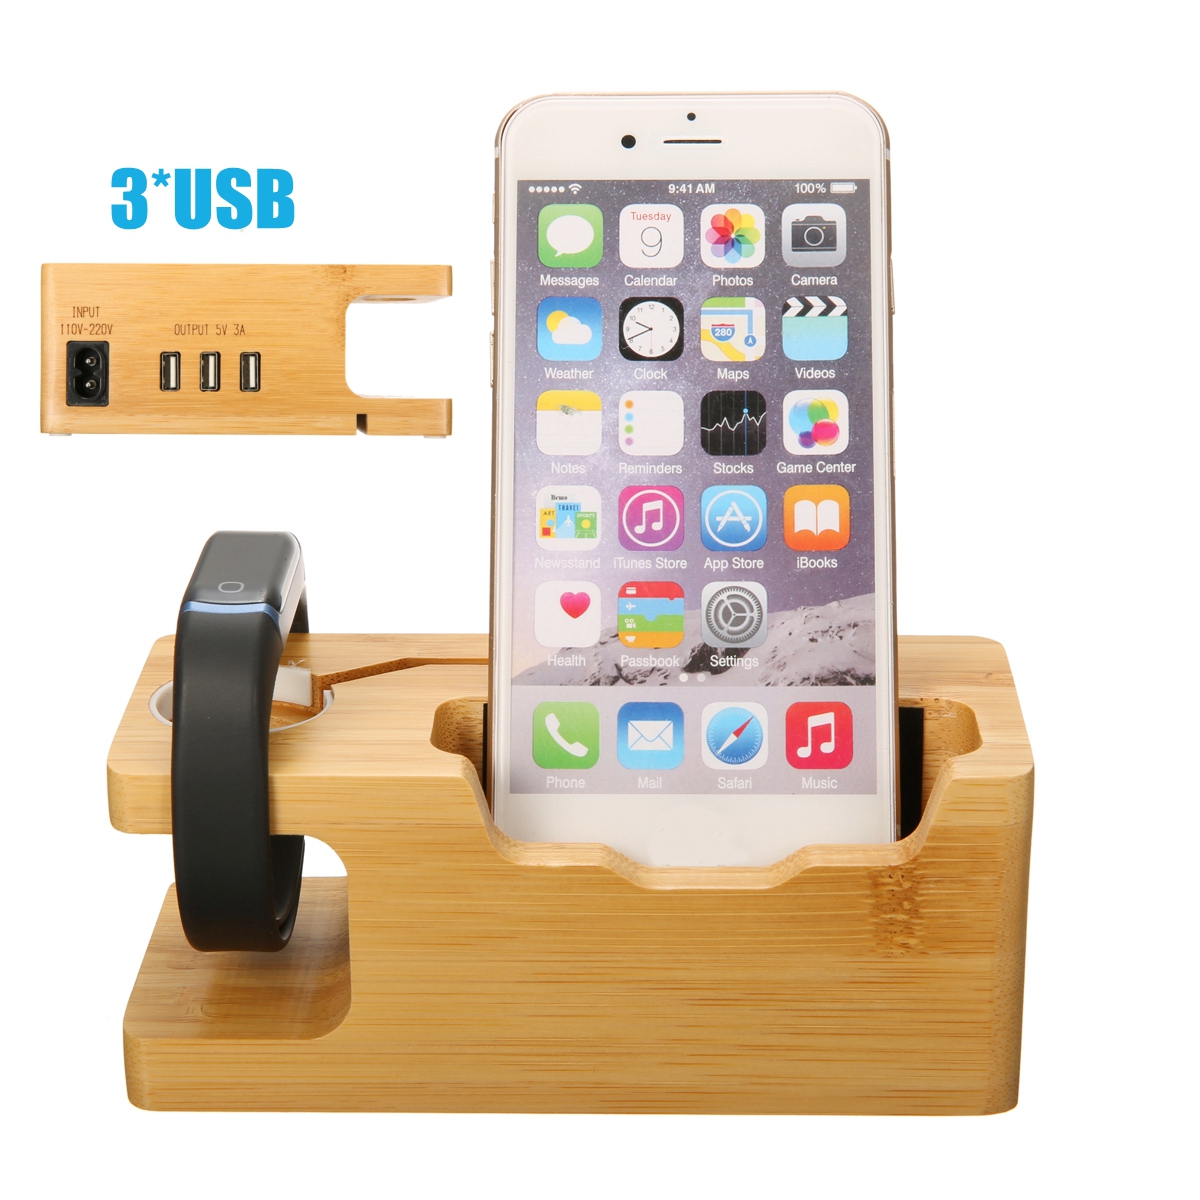 Bakeey-3USB-Charging-Station-Phone-Dock-Station-Fast-Charging-For-iPhone-XS-11Pro-MI10-Huawei-P30-P4-1720210-4